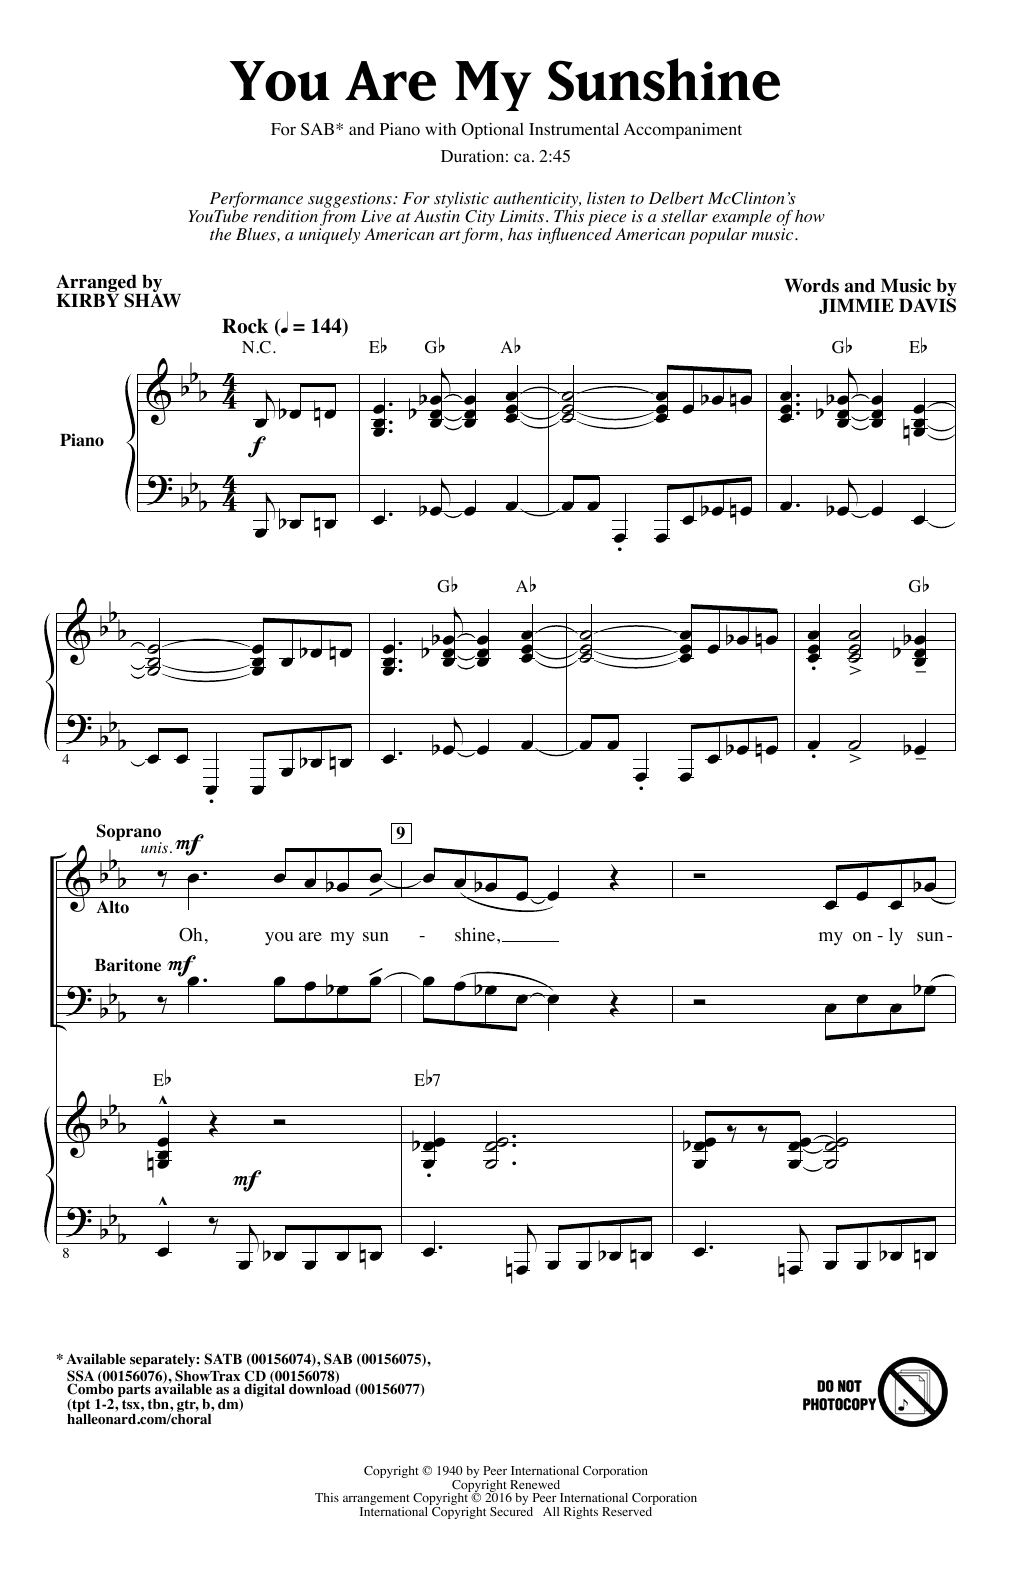 Download Jimmie Davis You Are My Sunshine (arr. Kirby Shaw) Sheet Music